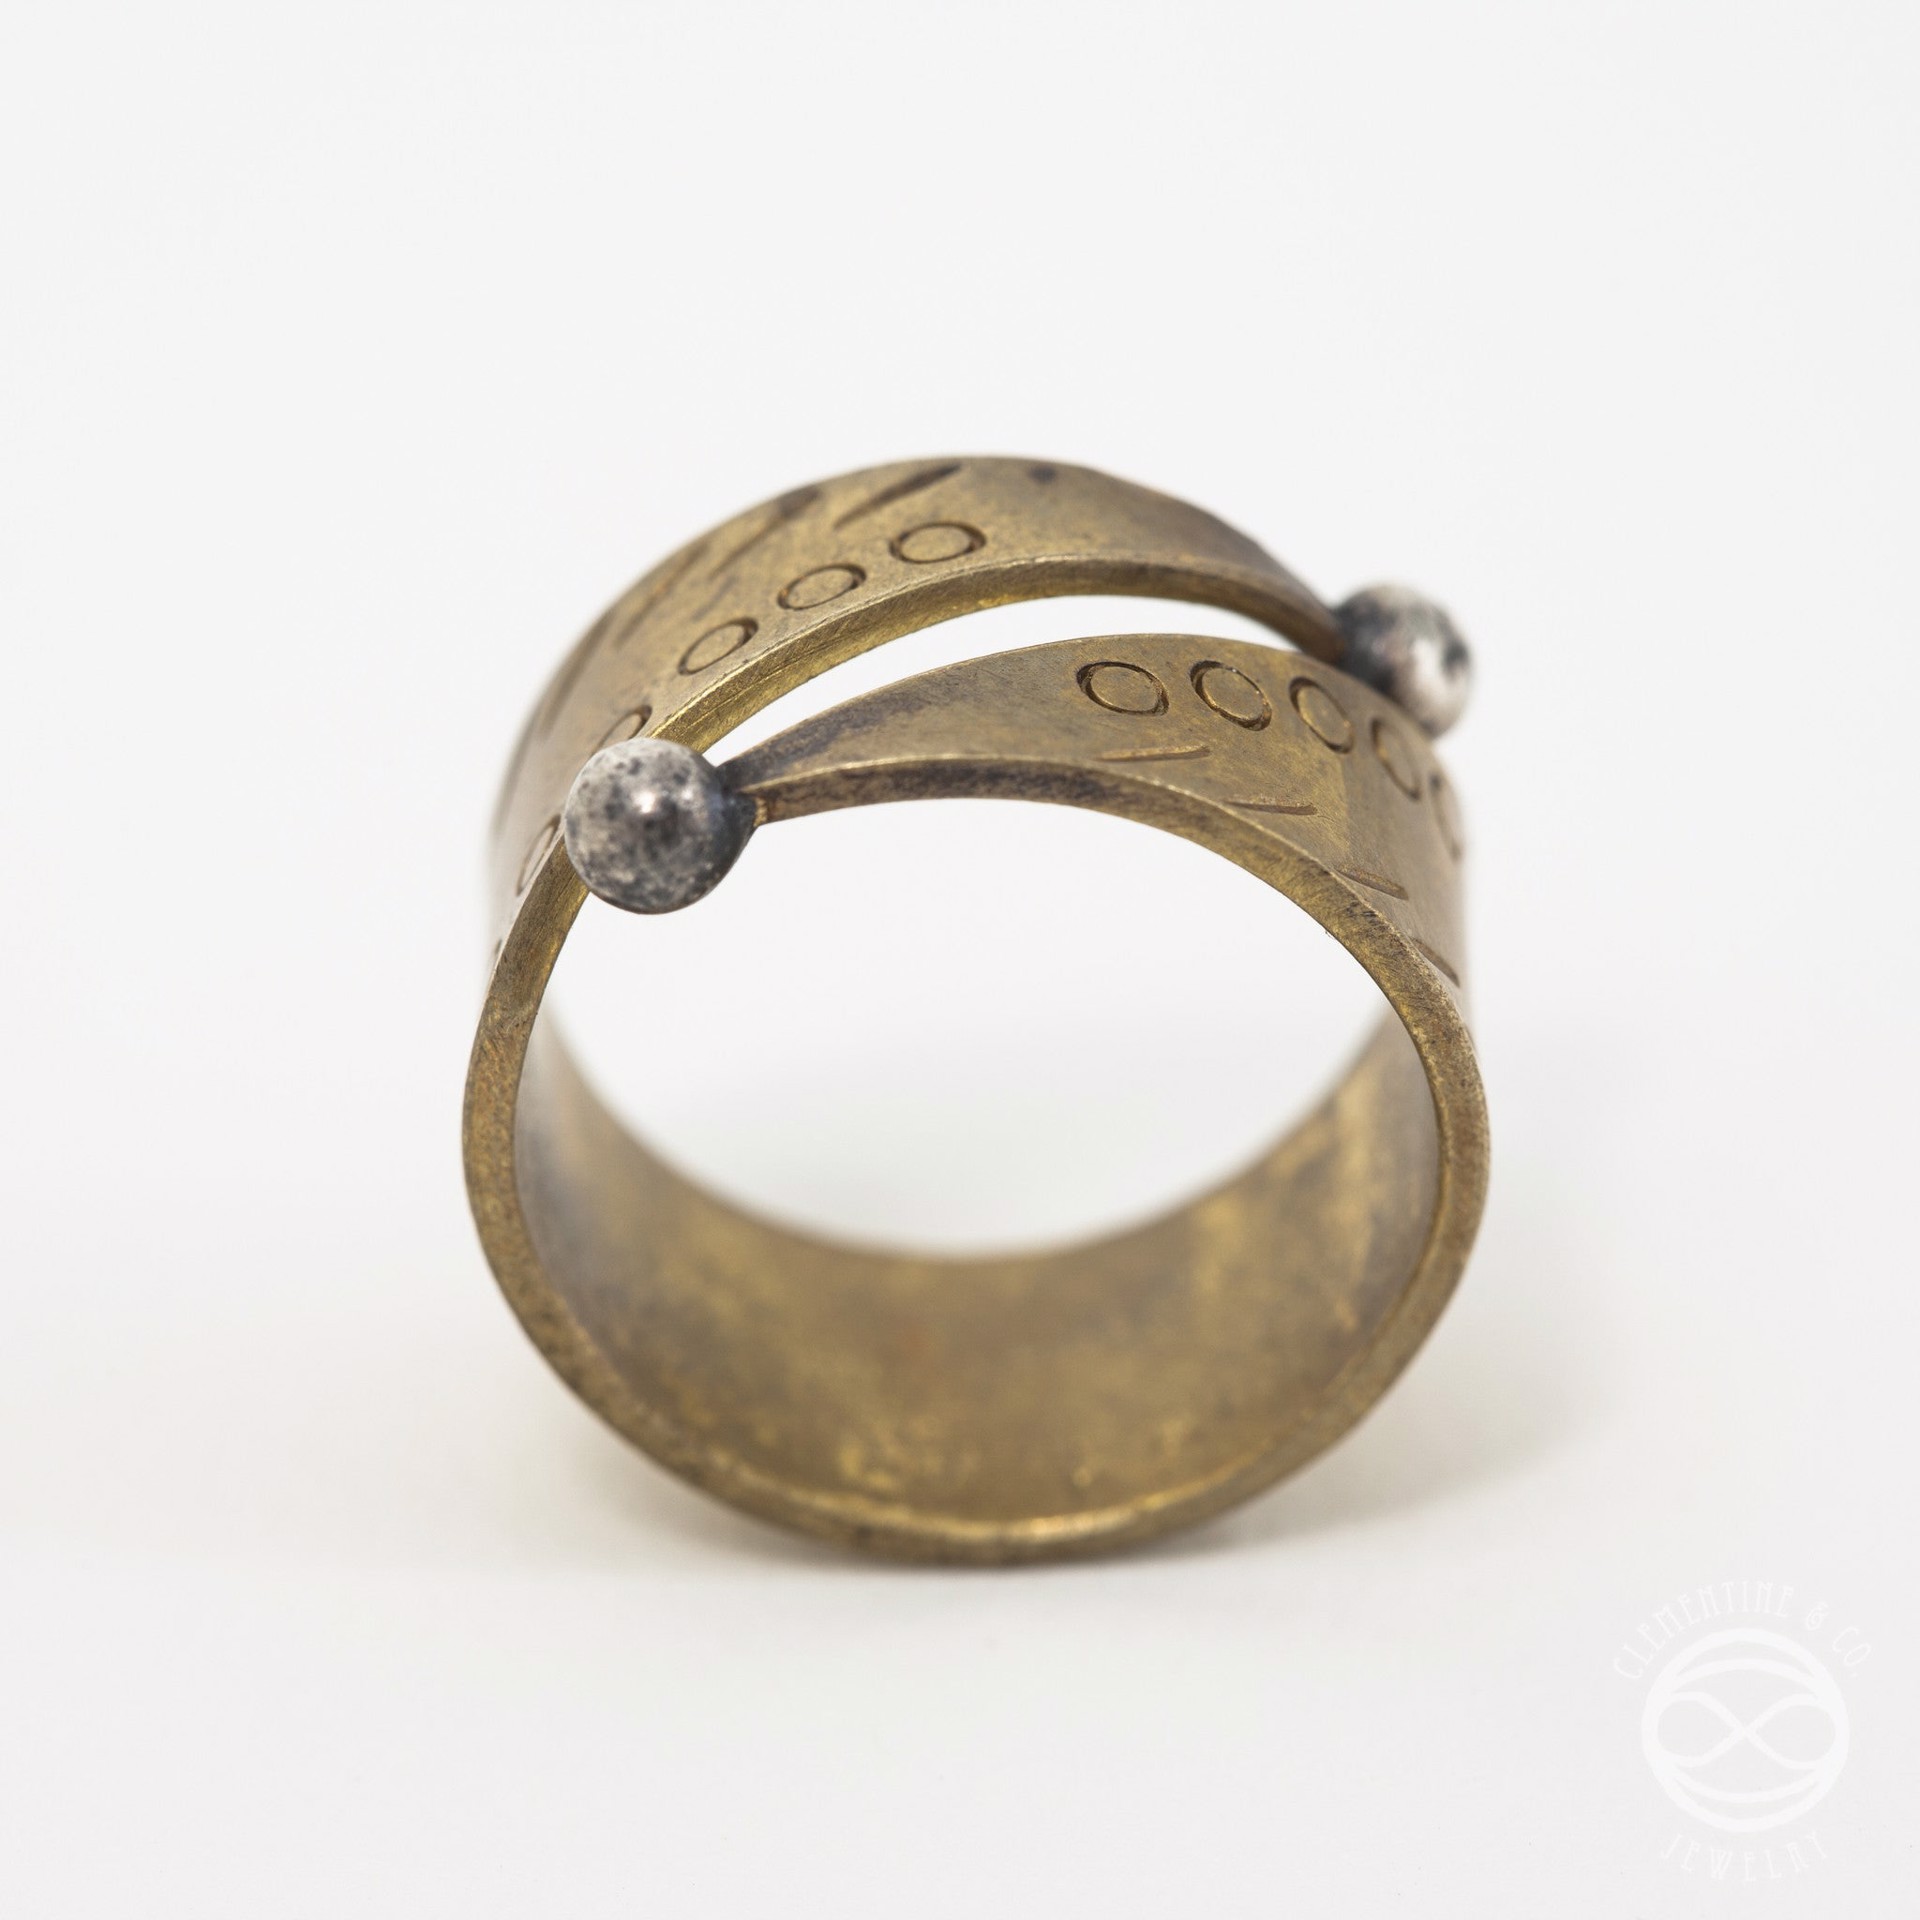 Souk Ring in Brass - 5 by Clementine & Co. Jewelry